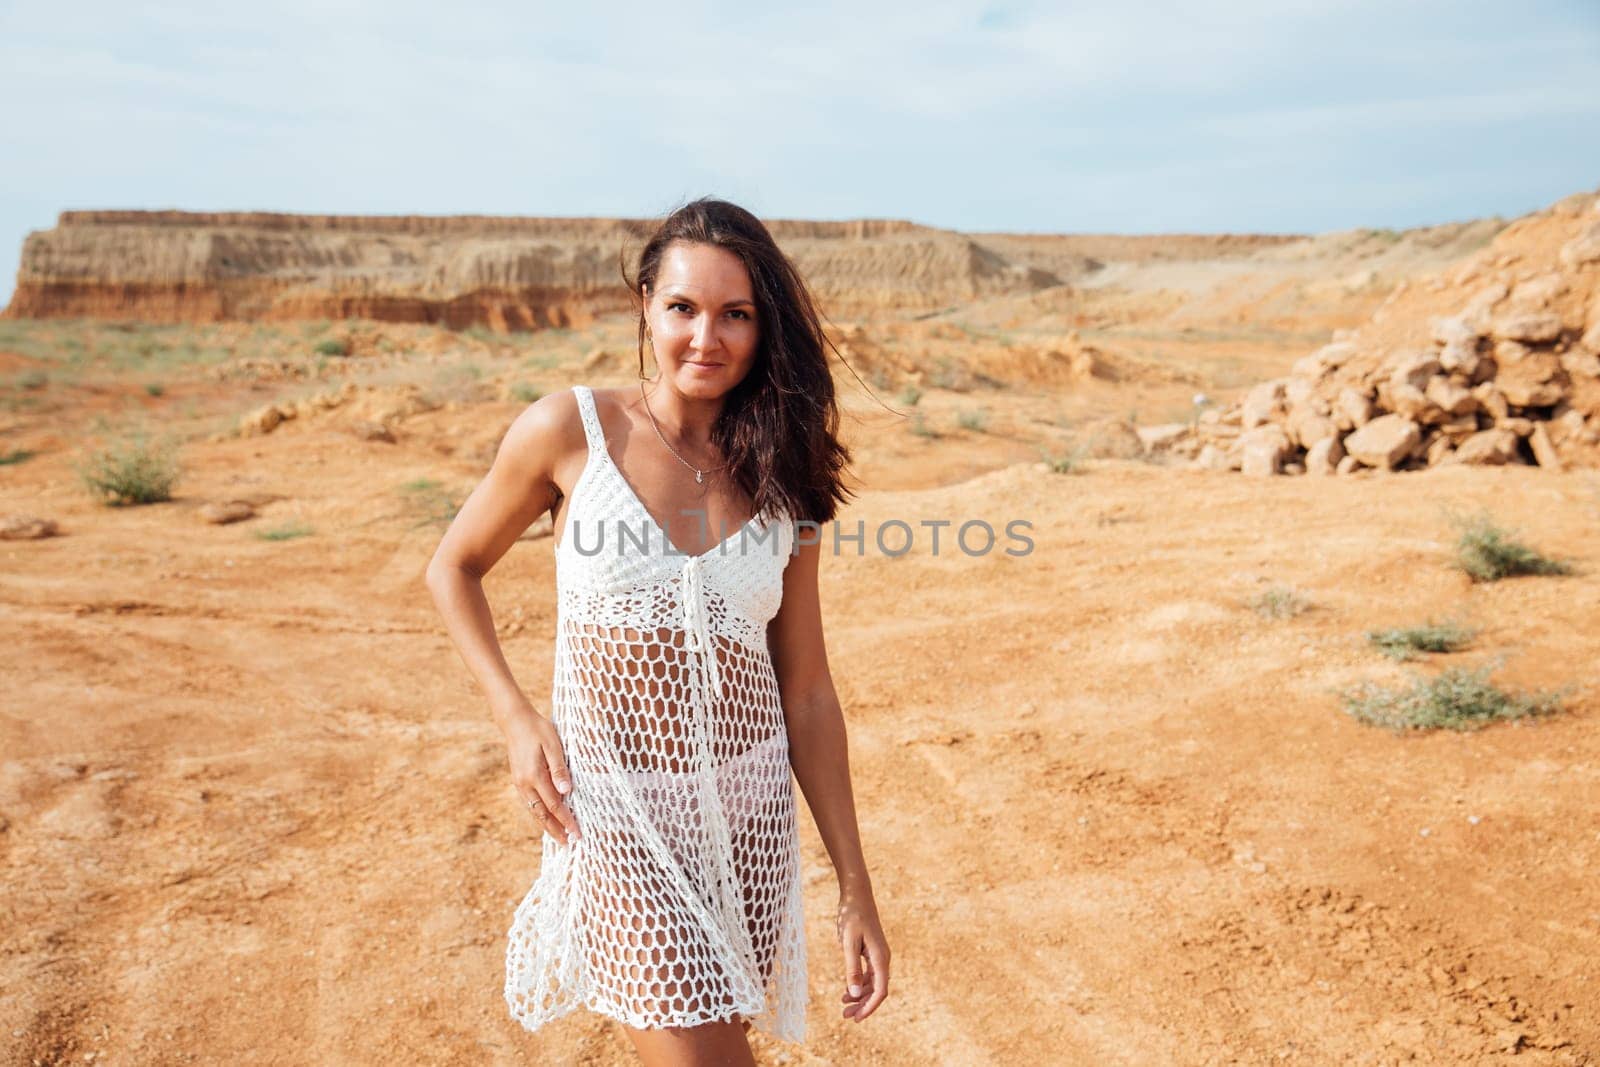 a woman in white clothes stands in a sandy locality